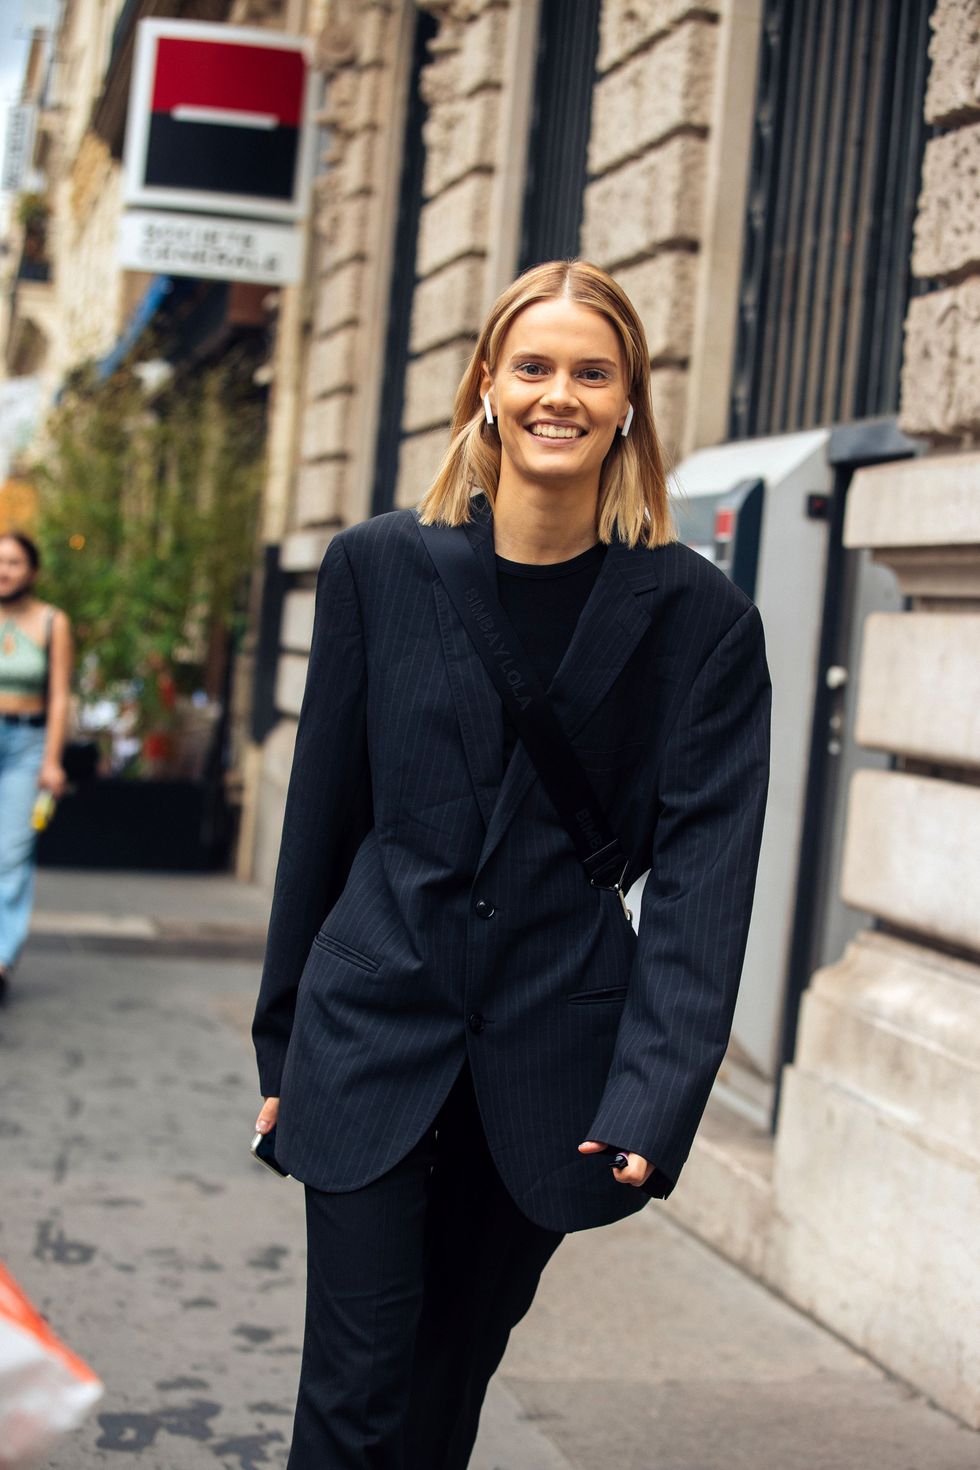 paris, france july 07 model daria koshkina wears apple airpods, a boxy dark blue pinstripe blazer, black pants, and a bimba y lola bag at the fendi show at palais brongniart during couture fashion week fallwinter 2022 on july 07, 2022 in paris, france photo by melodie jenggetty images